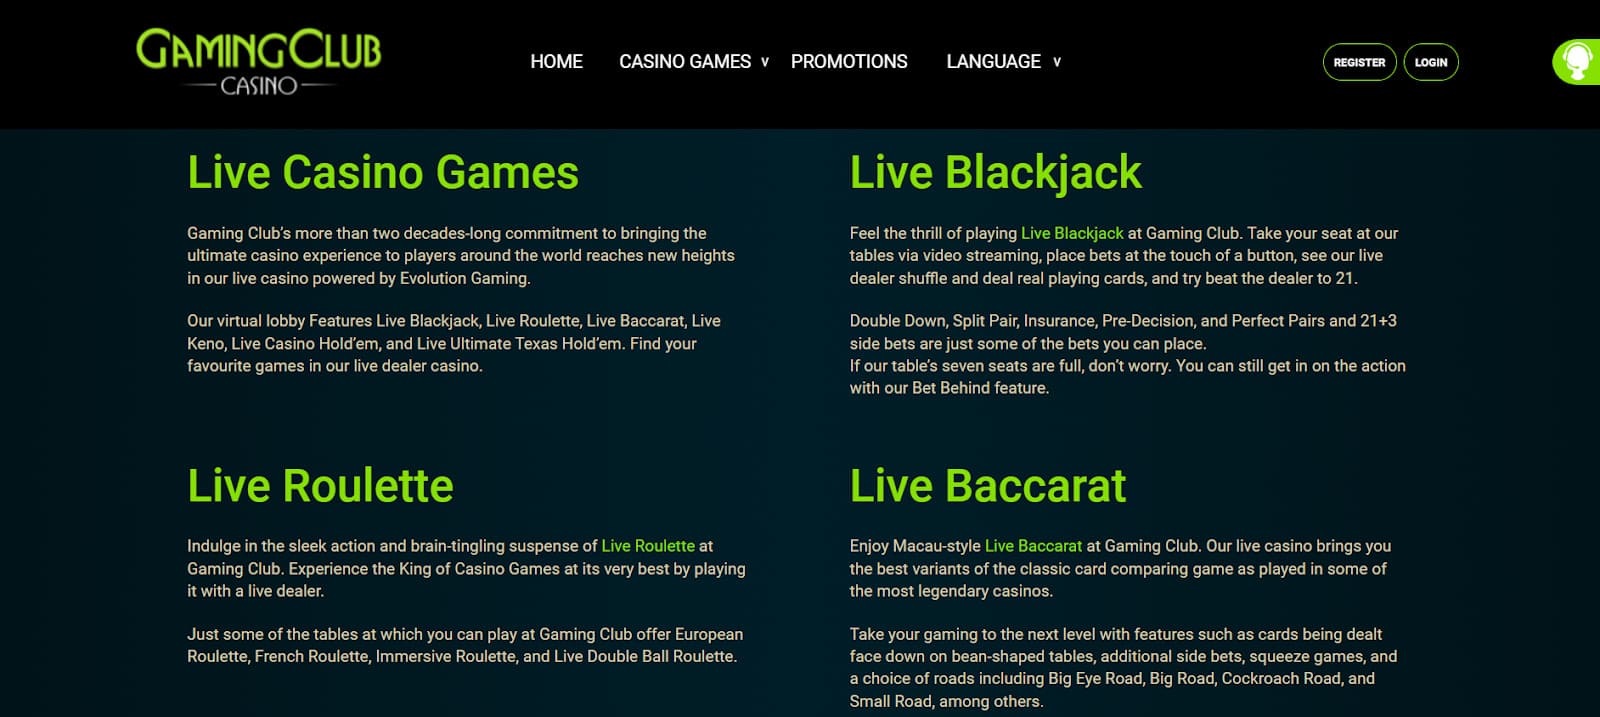 The Gaming Club Casino live games